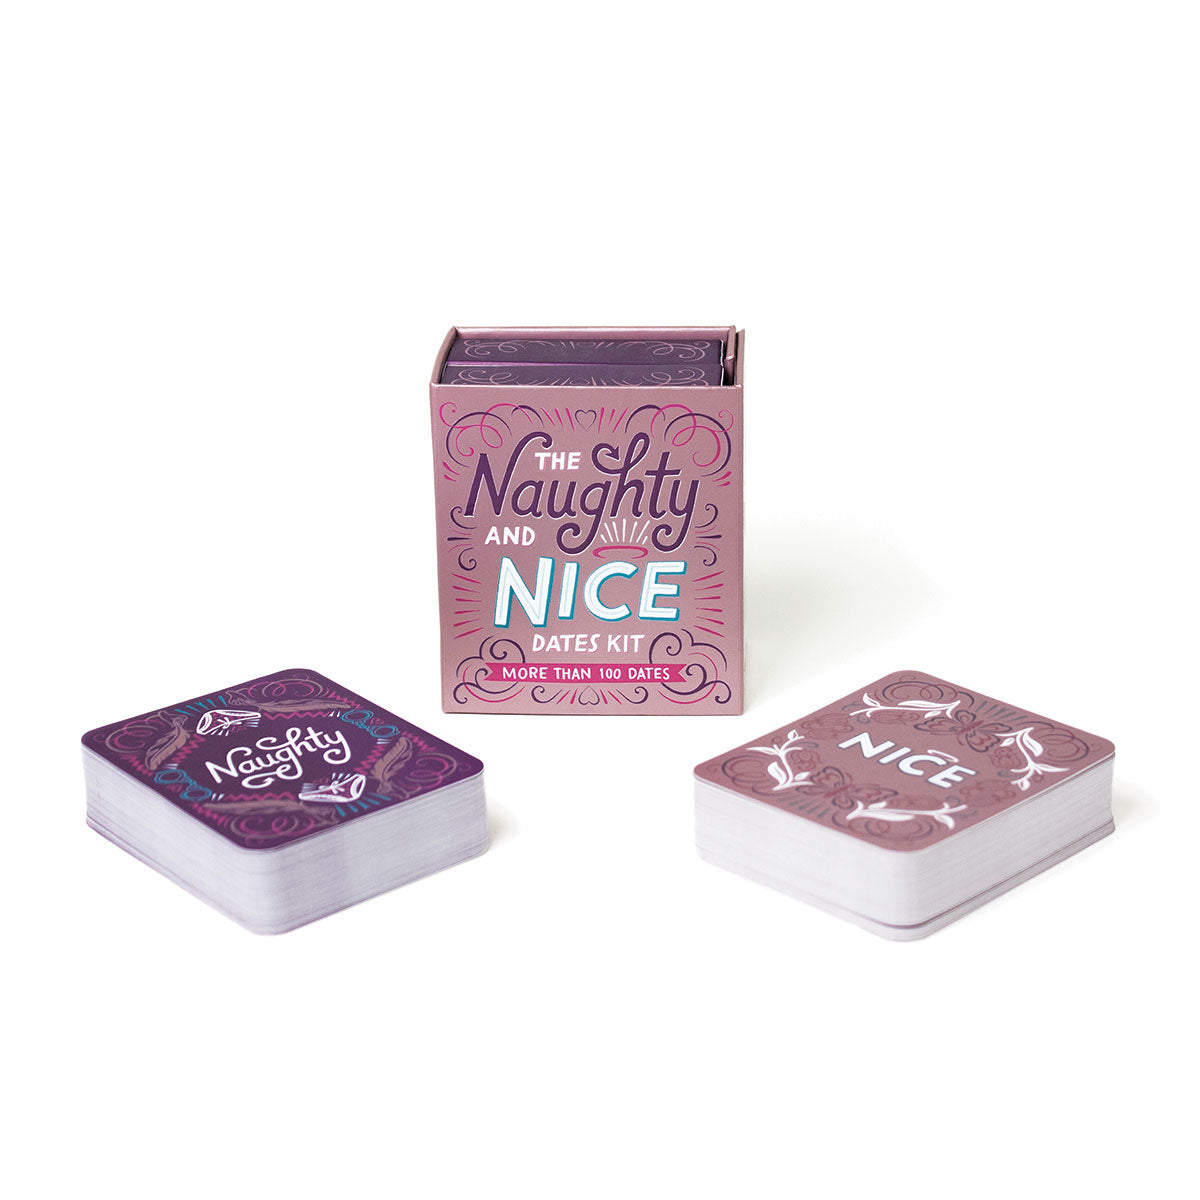 Naughty and Nice Dates Kit - Hachette Book Group